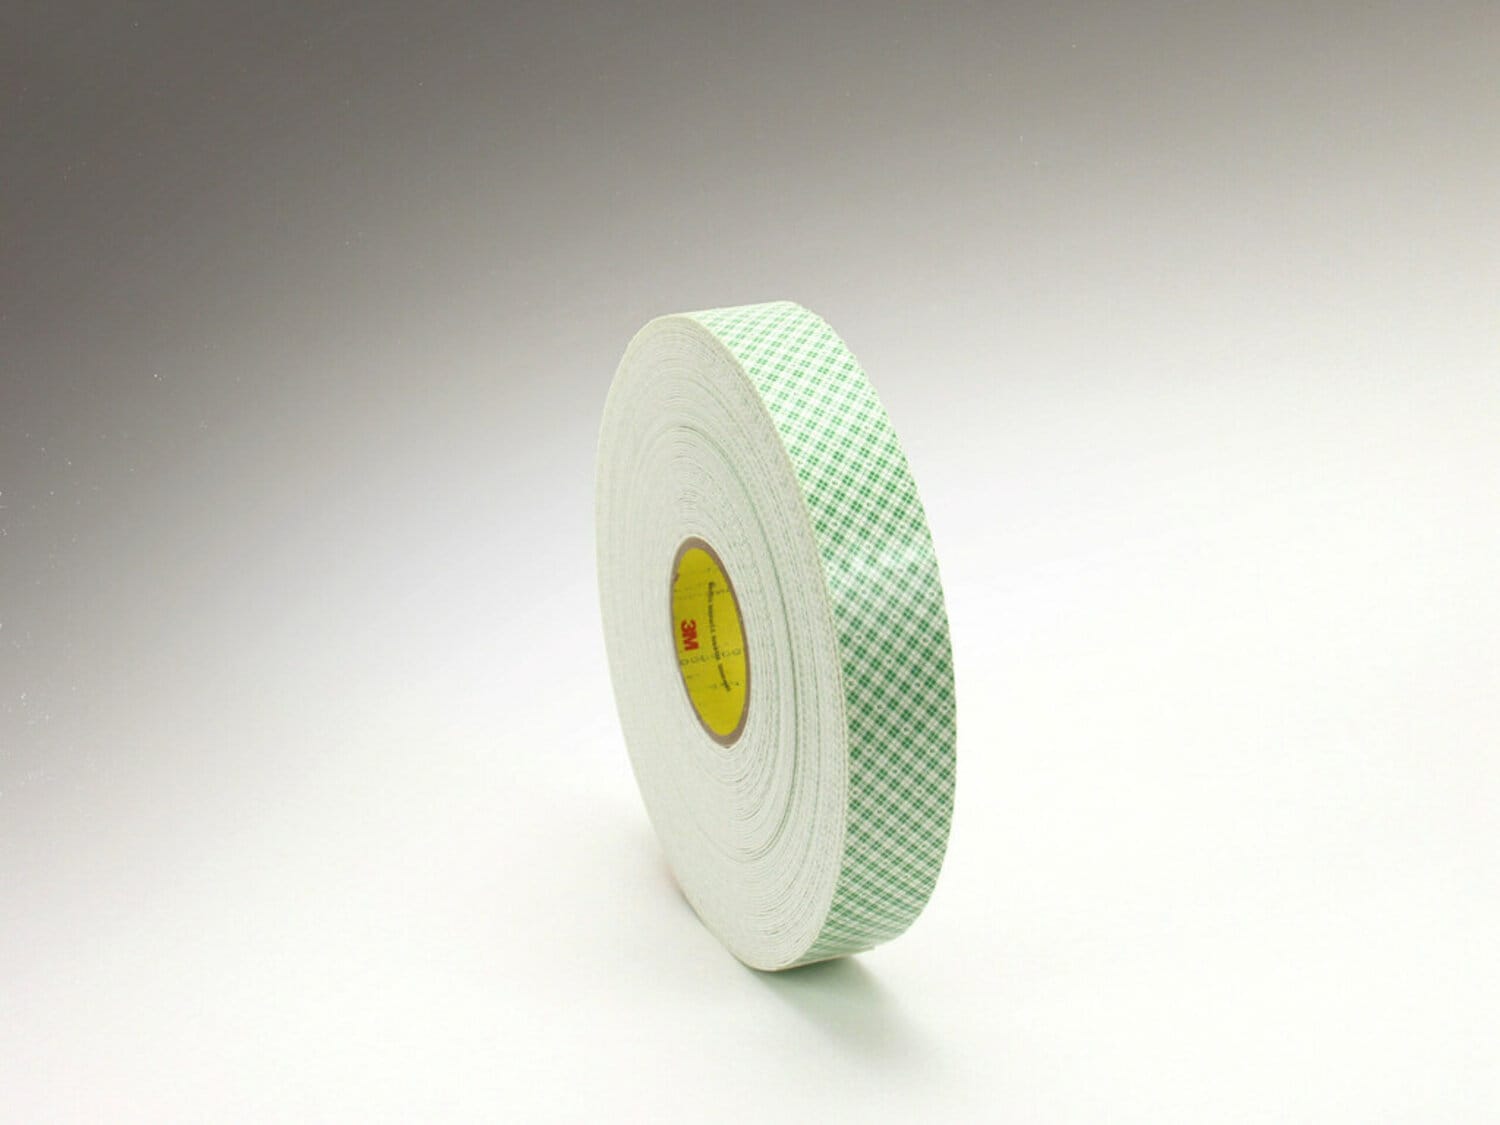 7000122486 - 3M Double Coated Urethane Foam Tape 4016, Off White, 1 1/2 in x 36 yd,
62 mil, 6 rolls per case